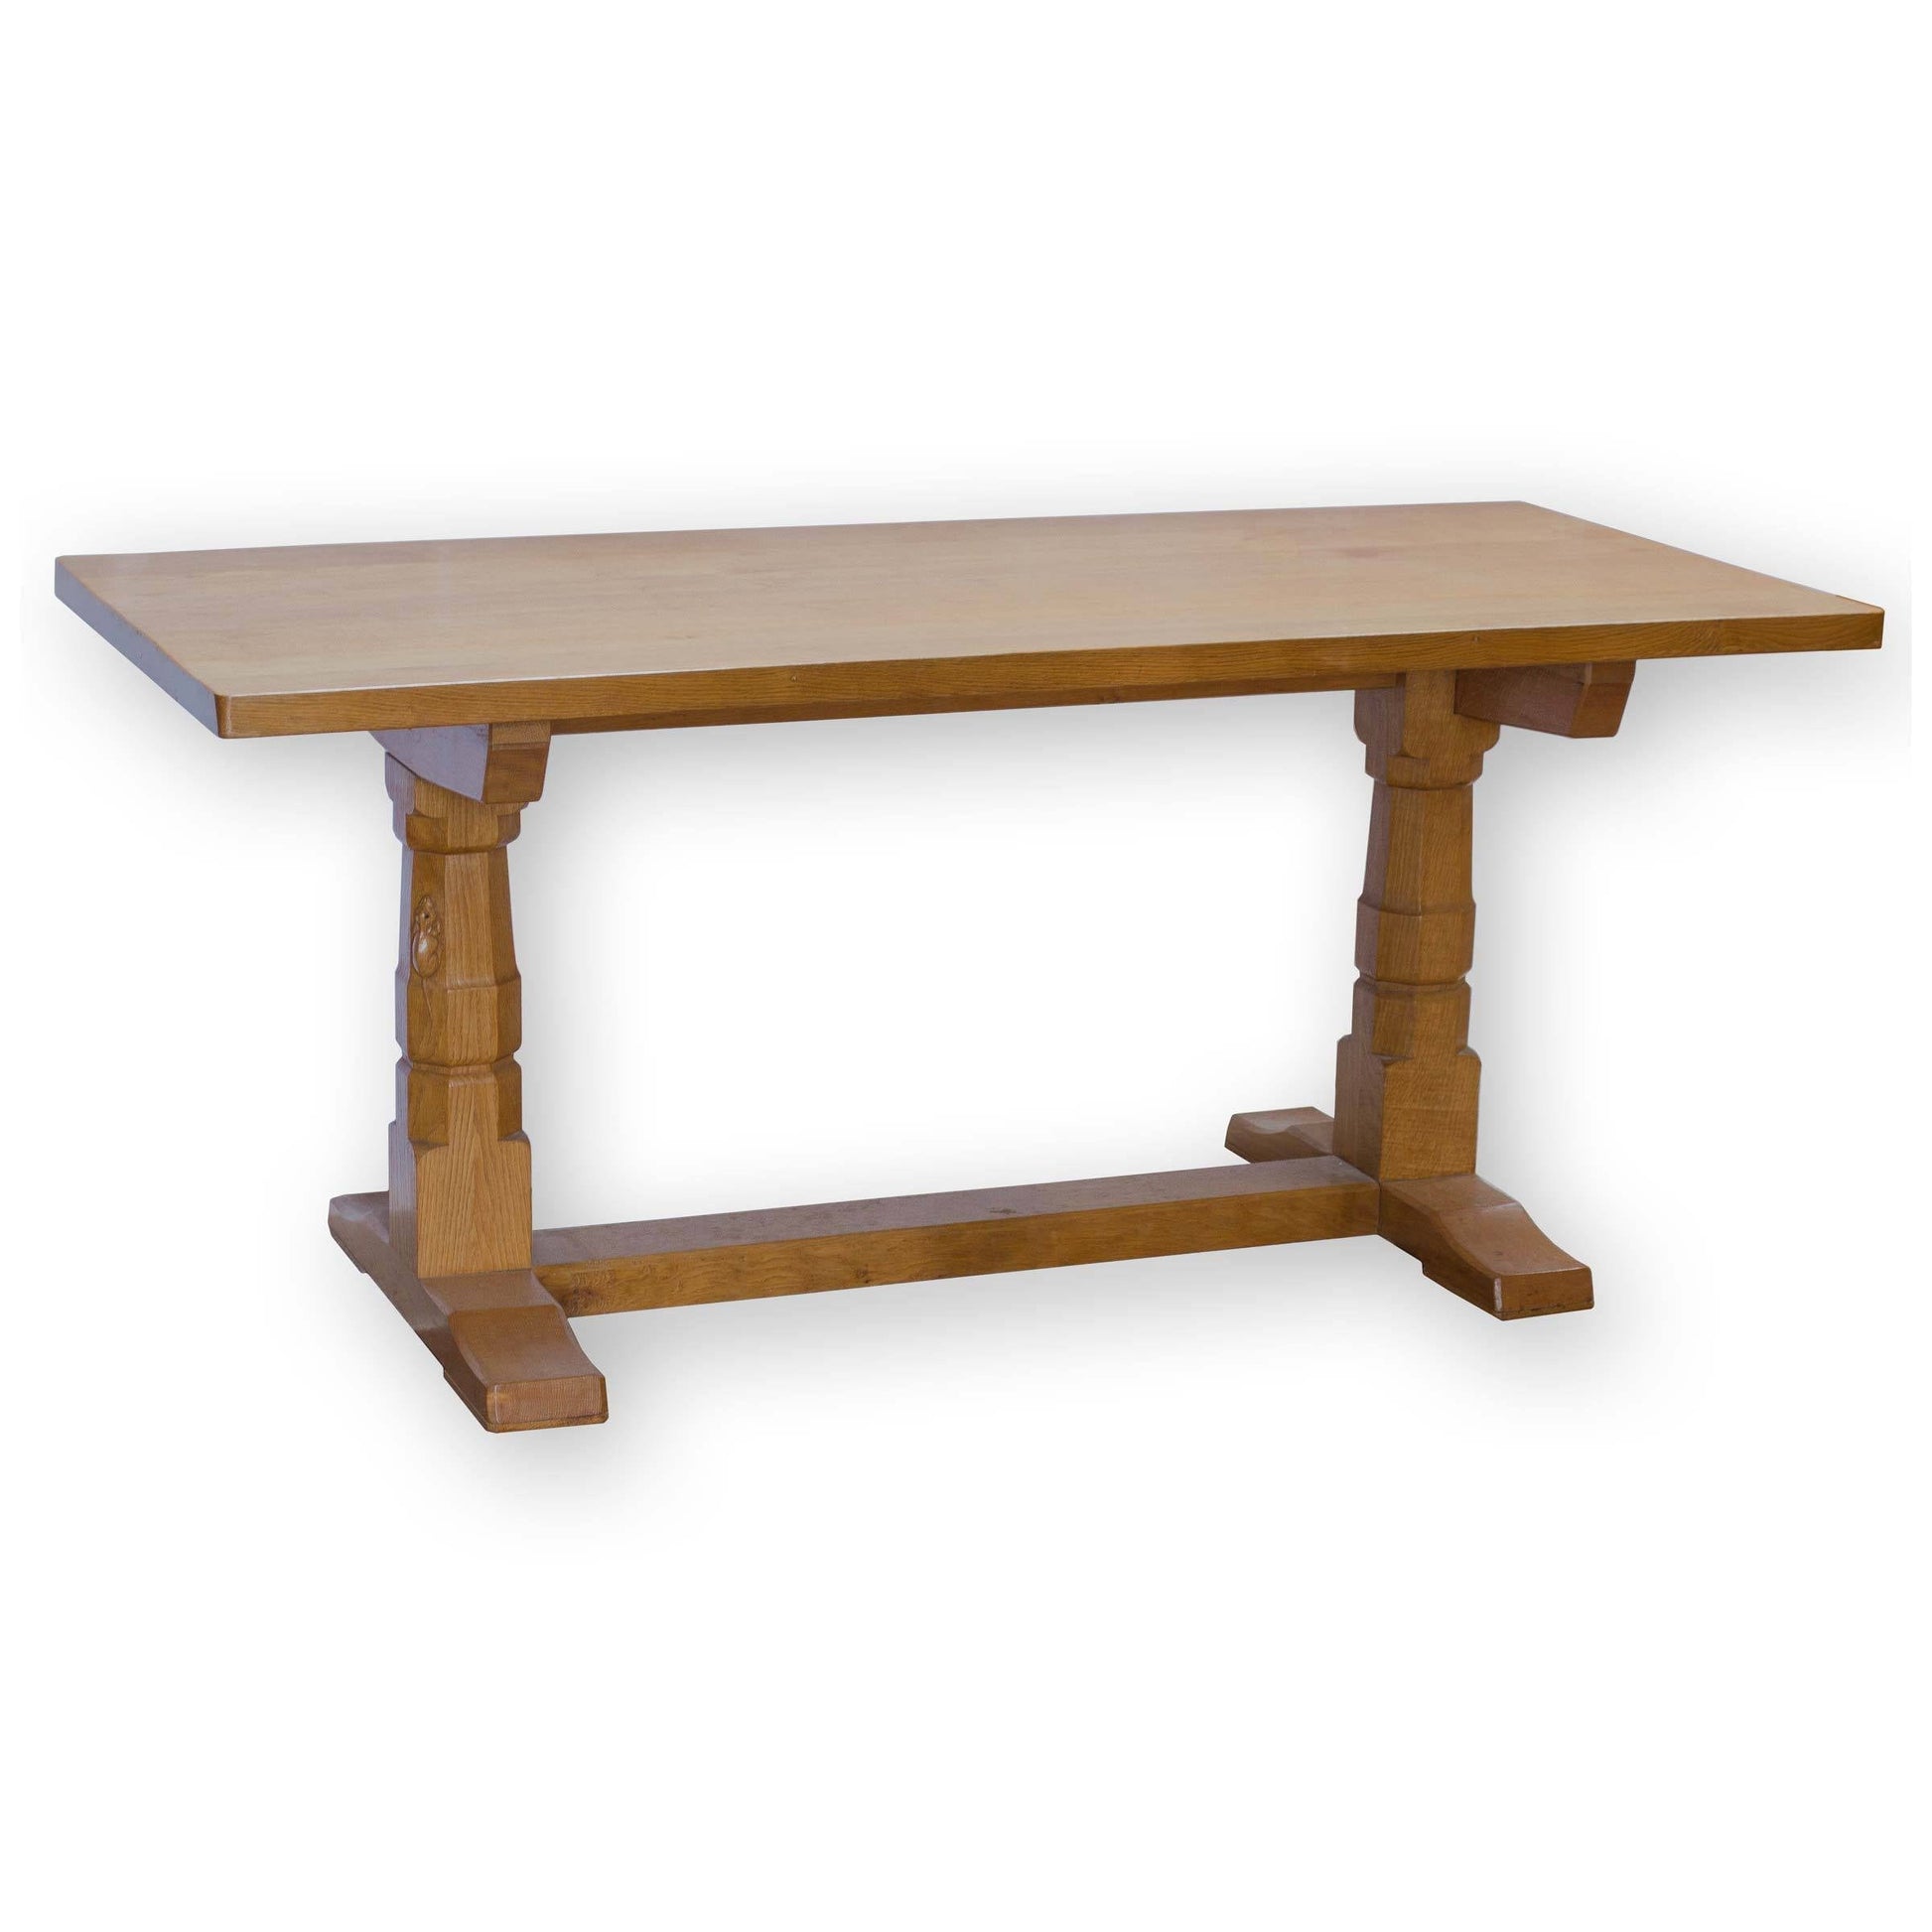 Arts & Crafts Yorkshire School Oak Dining/Refectory Table 1960 (Mouseman style)